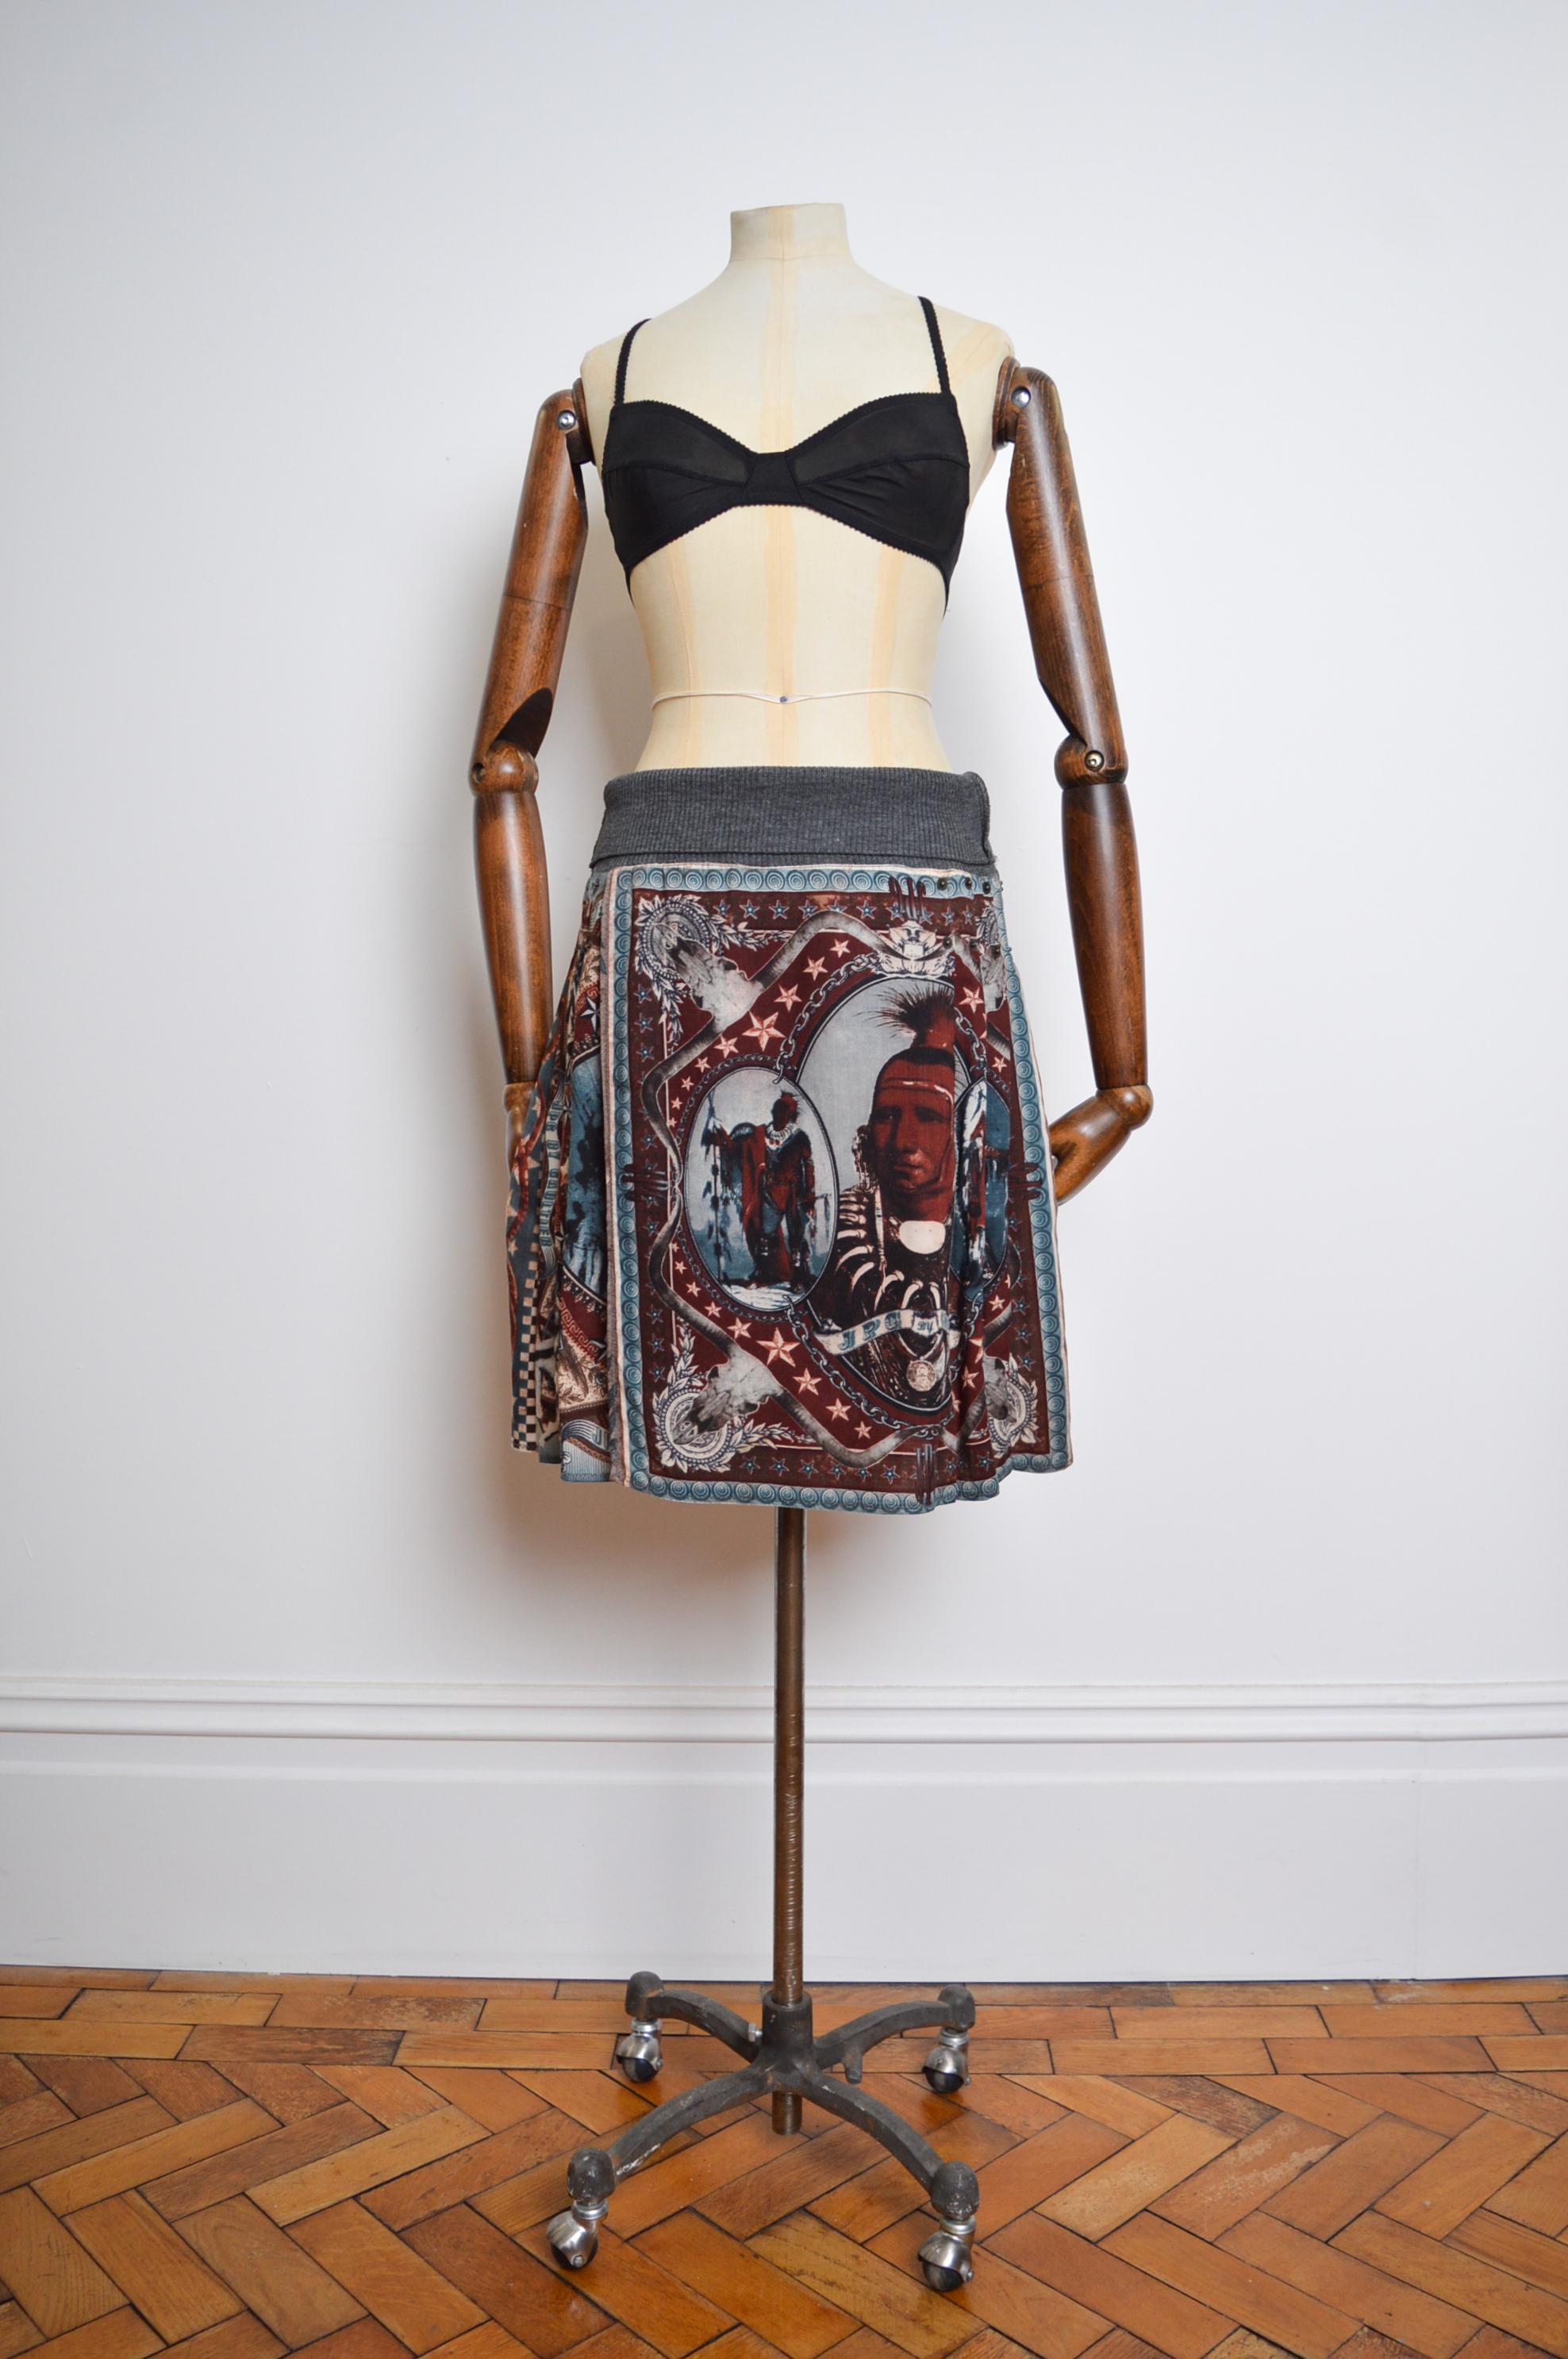 Superb A/W 1994 native american print wool kilt skirt by Jean Paul Gaultier crafted from a printed wool cloth with Metal rivet detailing and fold over knitted waistband.

MADE IN FRANCE !

Recommended size UK 8-12. (this depends on wether you wish